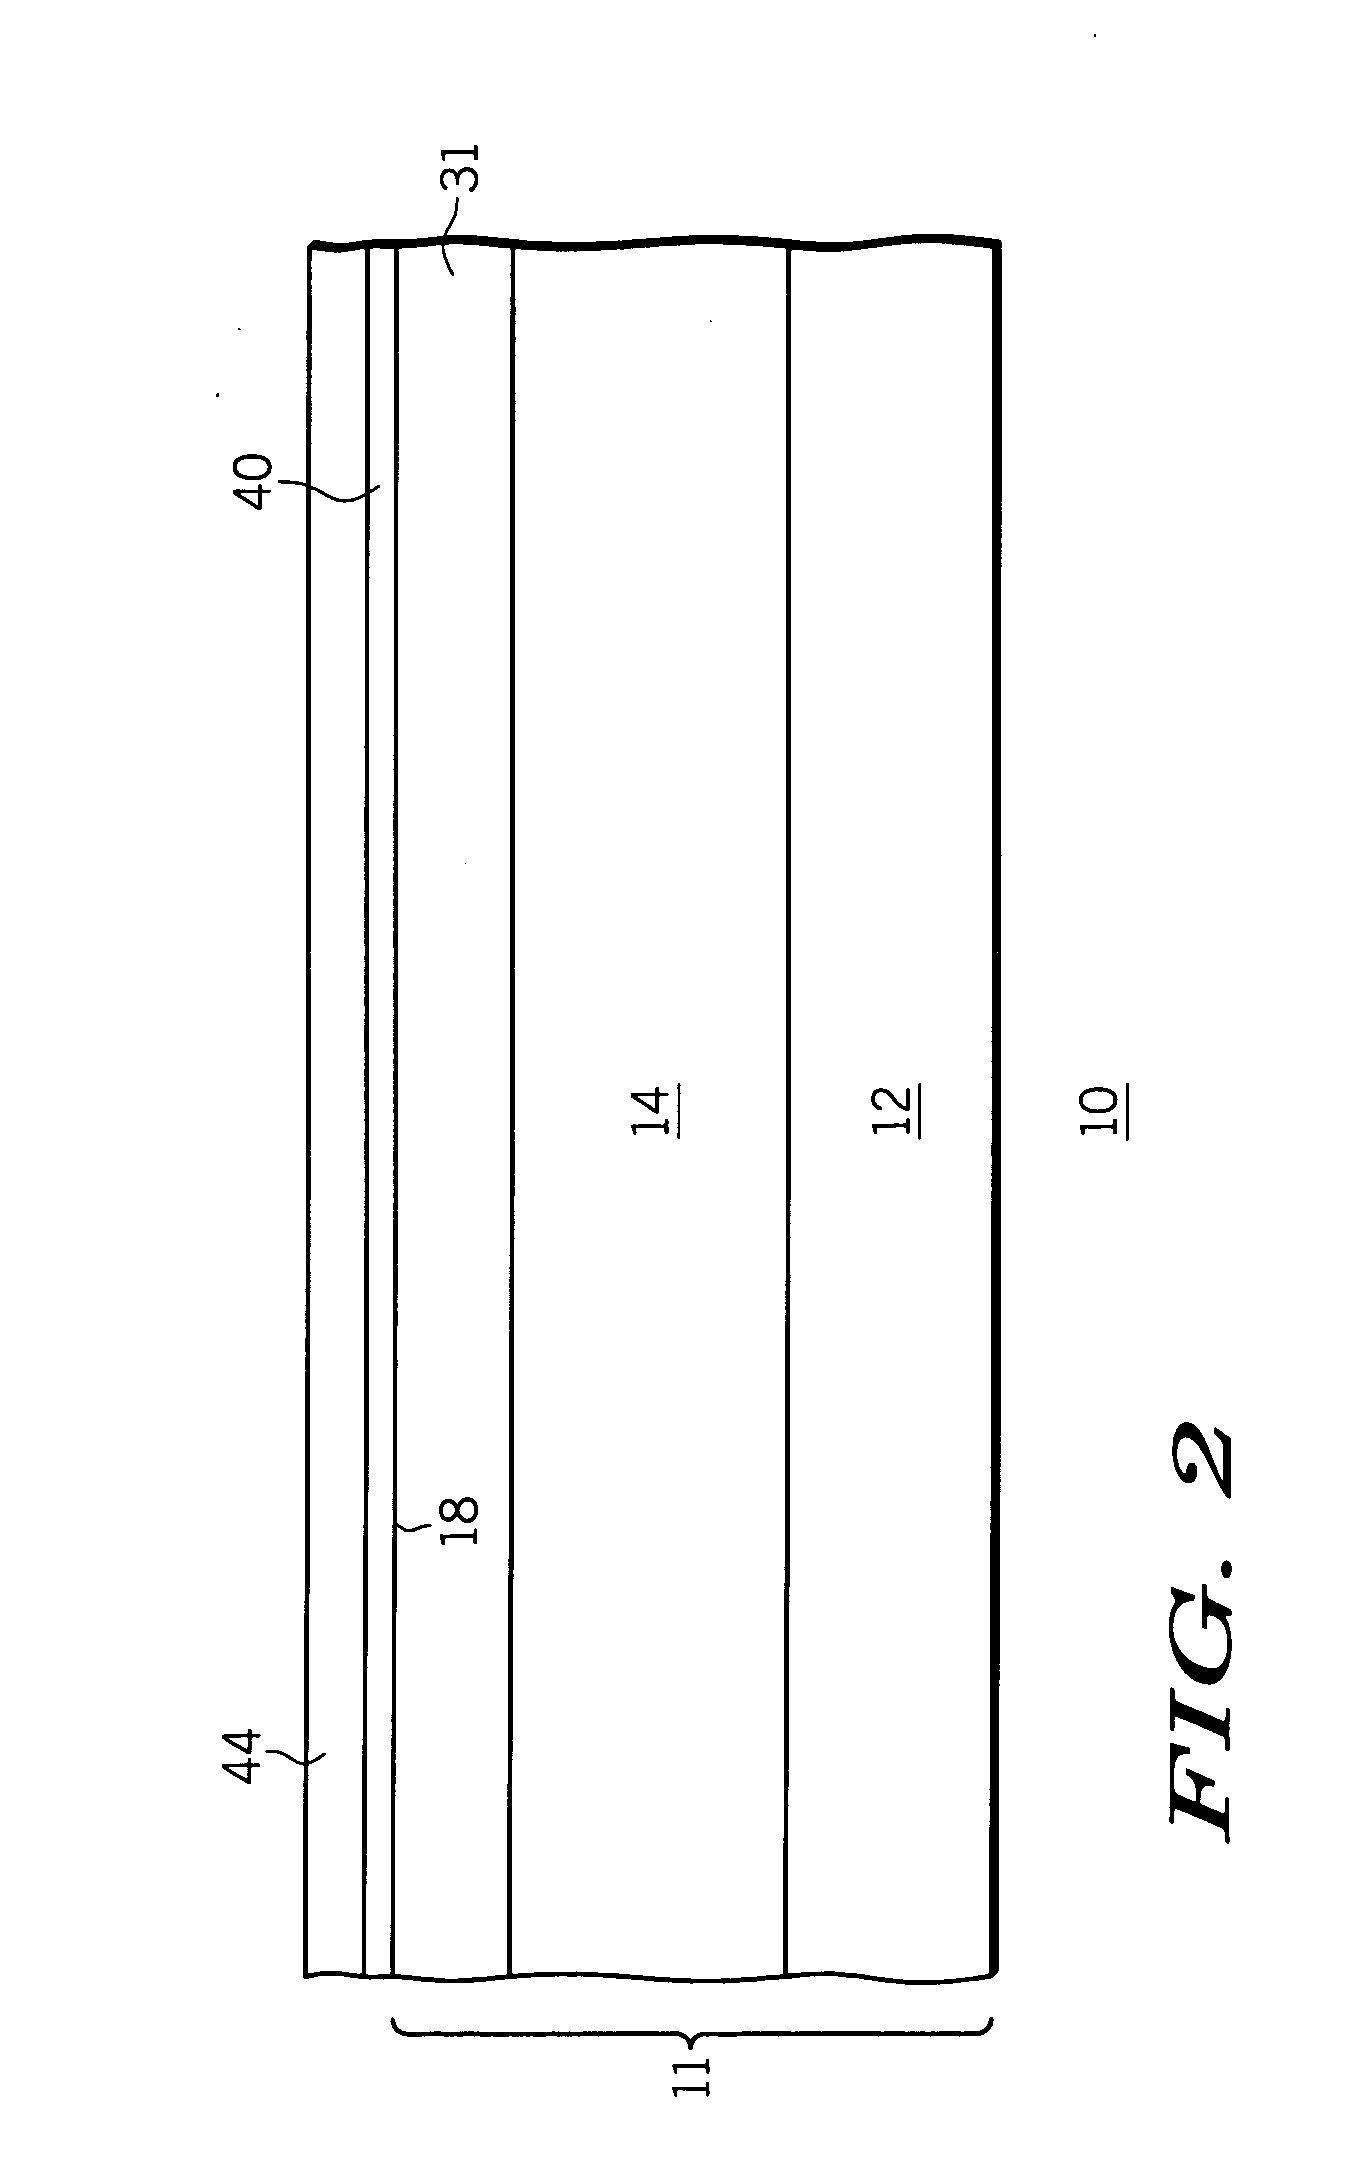 Semiconductor device having sub-surface trench charge compensation regions and method